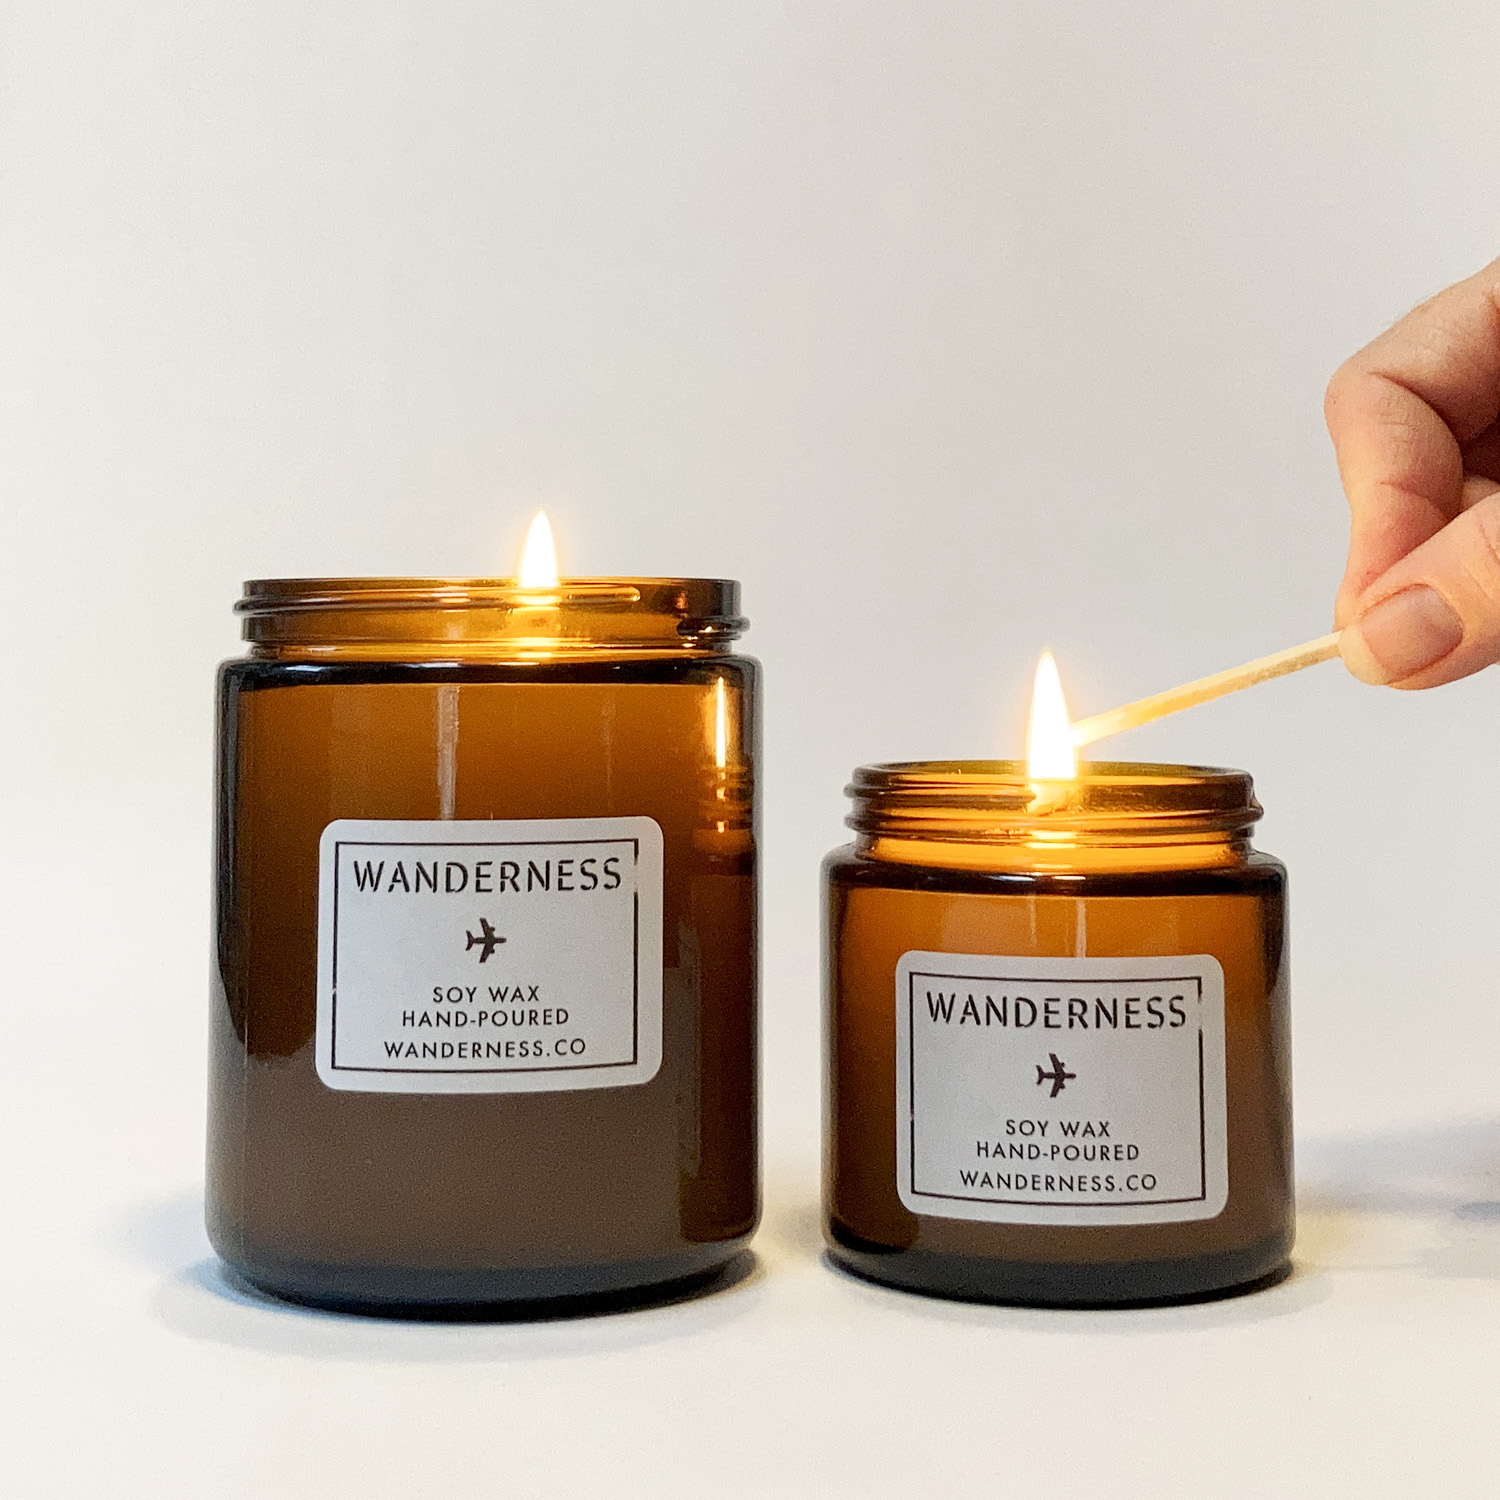 WANDERNESS scented candles are based on popular travel destinations, an idea sparked by the global lockdown